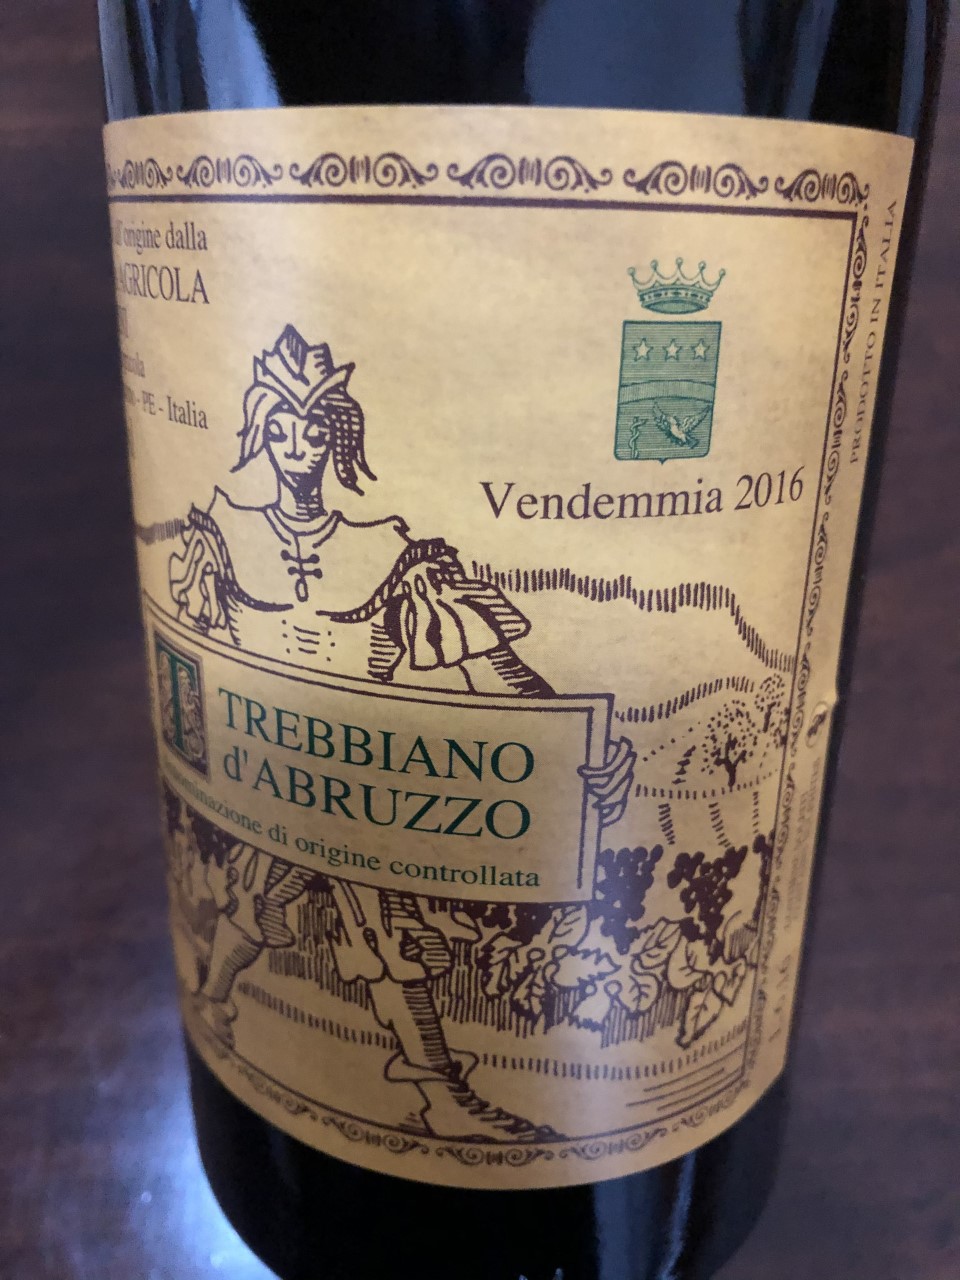 Valentini-once-again-made-a-stellar-Trebbiano-dAbruzzo-wine-oneof-Italys-longest-lived-white-wines-1-1-1-1-1-1-1-1-1-1-1-1